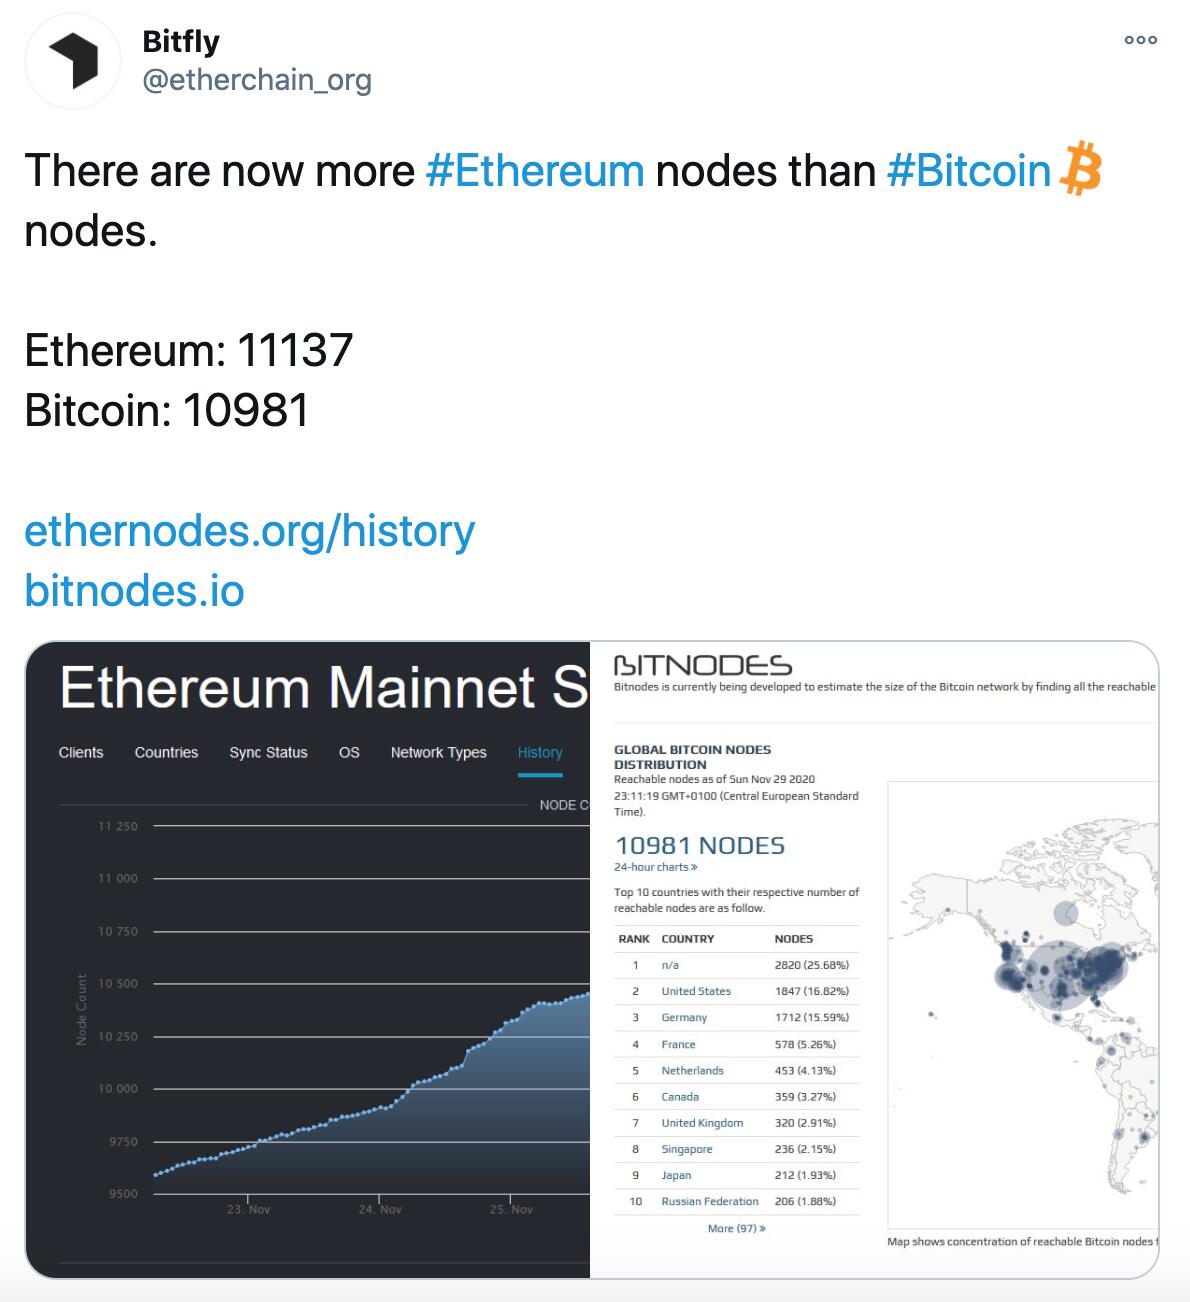 Bitfly: There are now more Ethereum nodes than Bitcoin nodes.